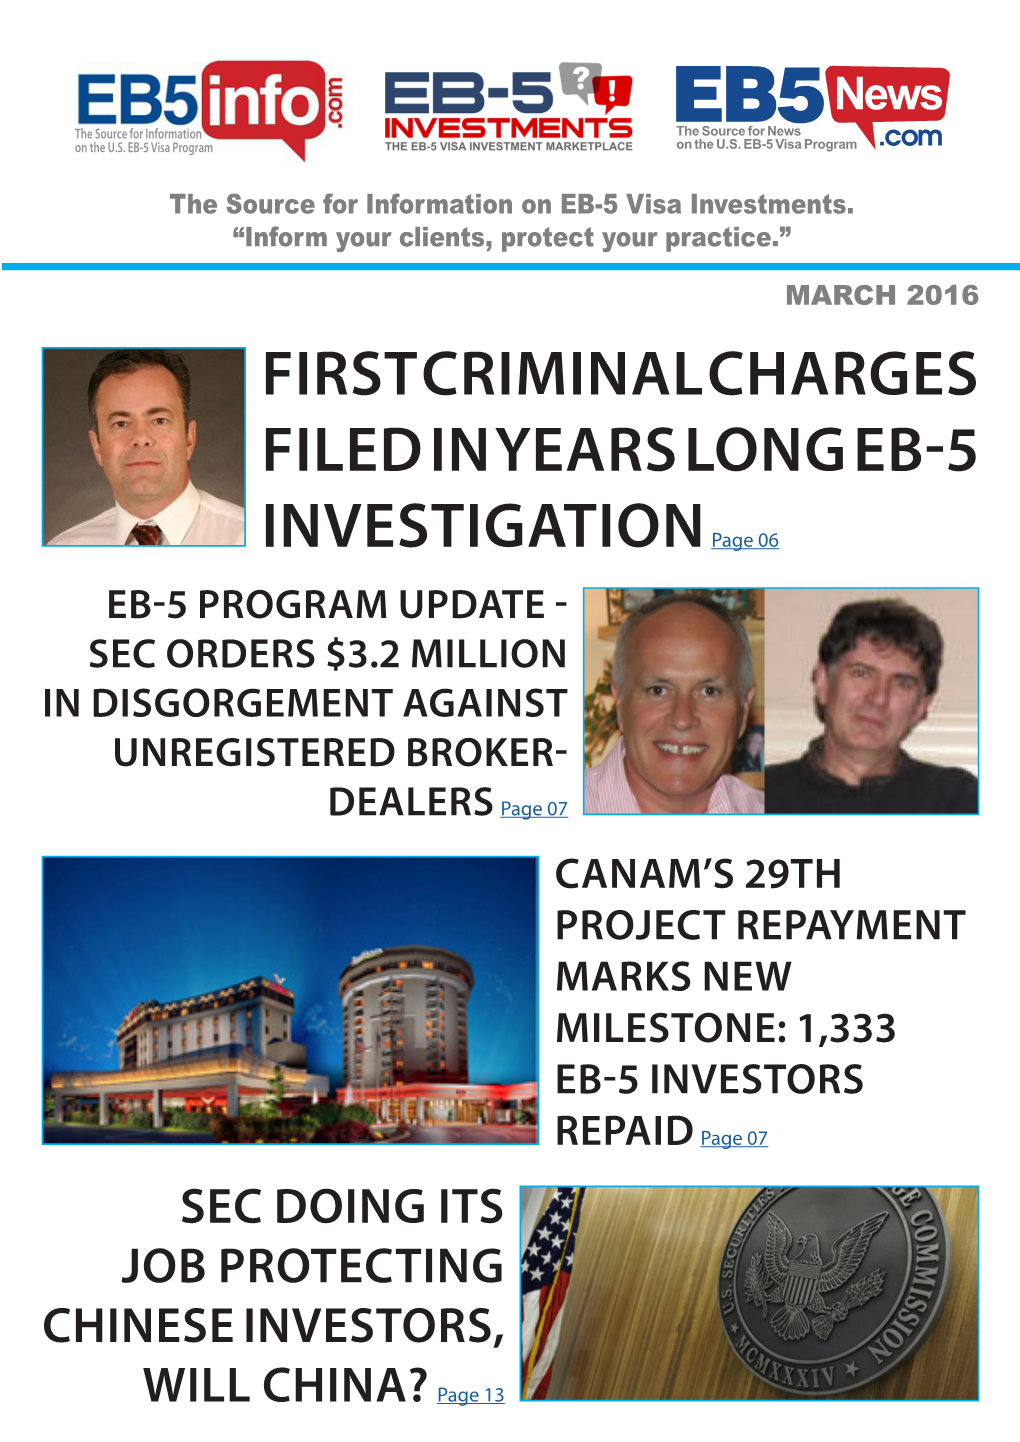 First Criminal Charges Filed in Years Long Eb-5